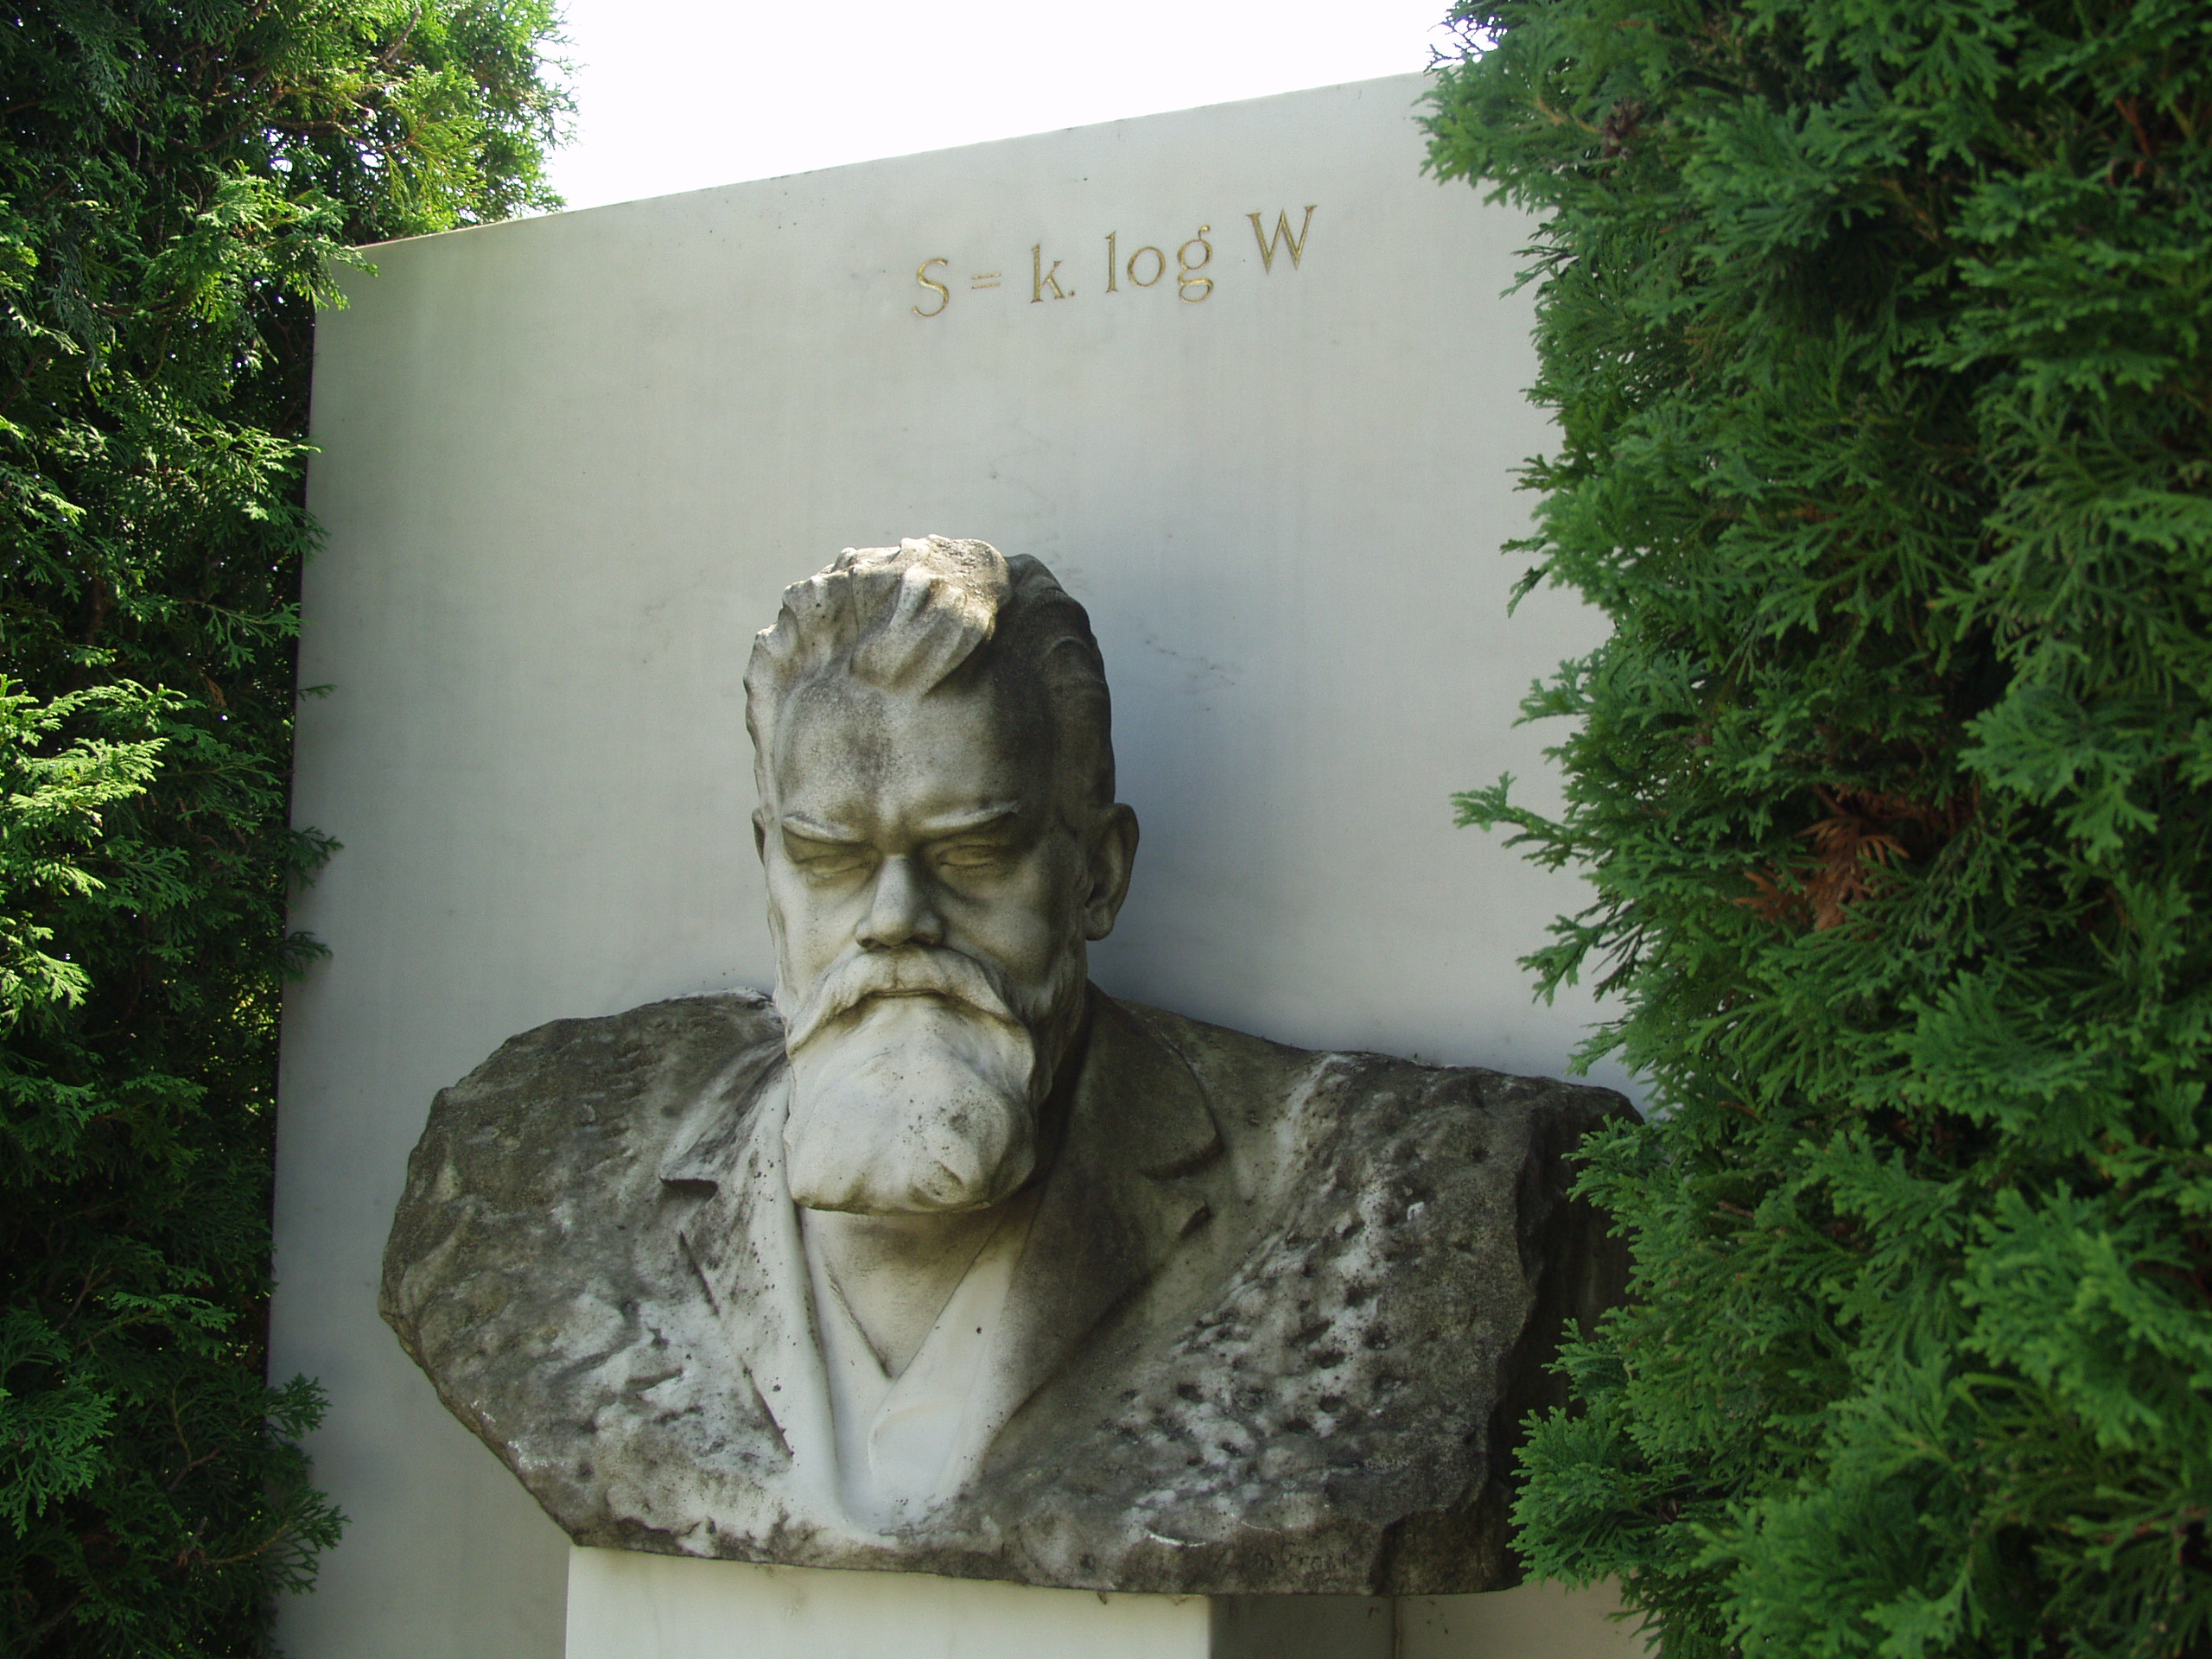 Vienna, Austria. Boltzmann's Tomb in the Zentralfriedhof (Central
Cemetary). The Tomb is in Gruppe 14 C Grab No 1 (group 14 grave number
1). Photos by Tom Schneider or of him by Gerd Muller. 2002 July 14.
This image: bust of Boltzmann.